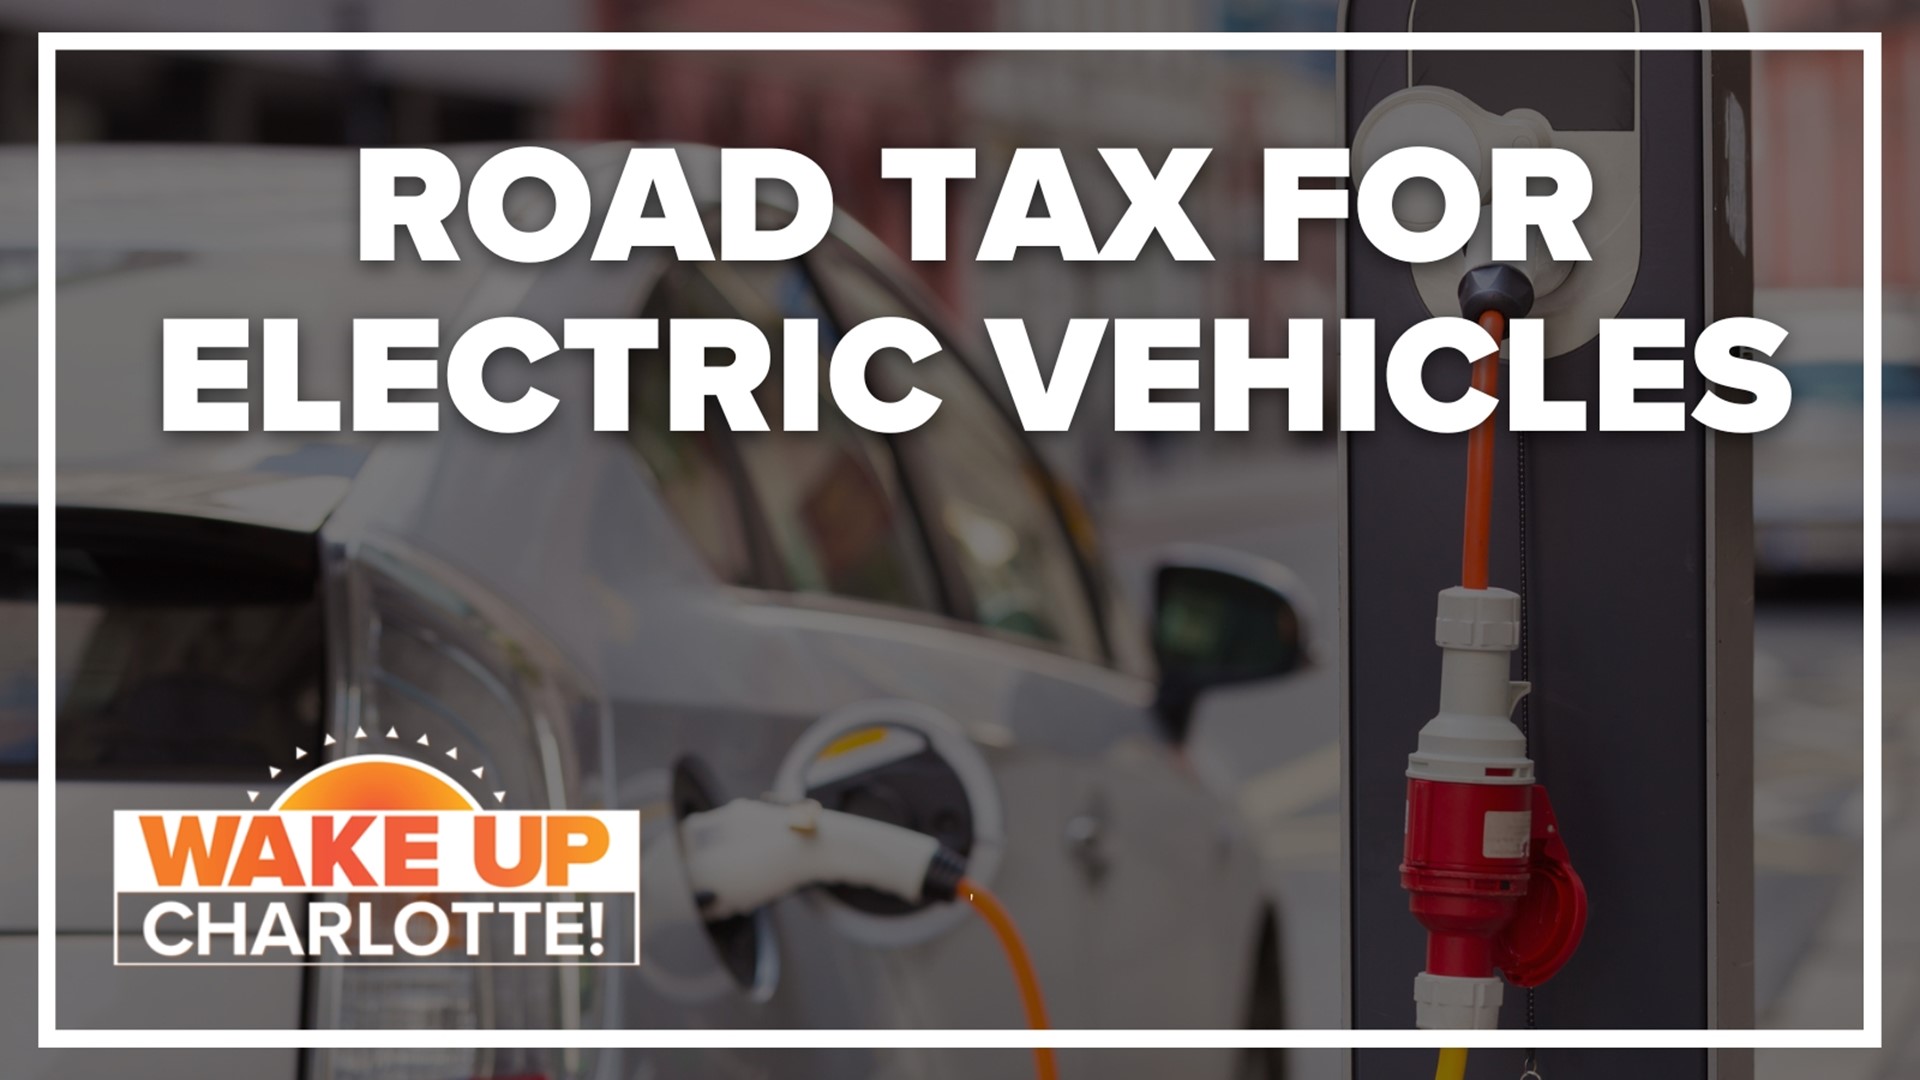 With the push for electric cars, how can the state recoup road tax on electric vehicles?